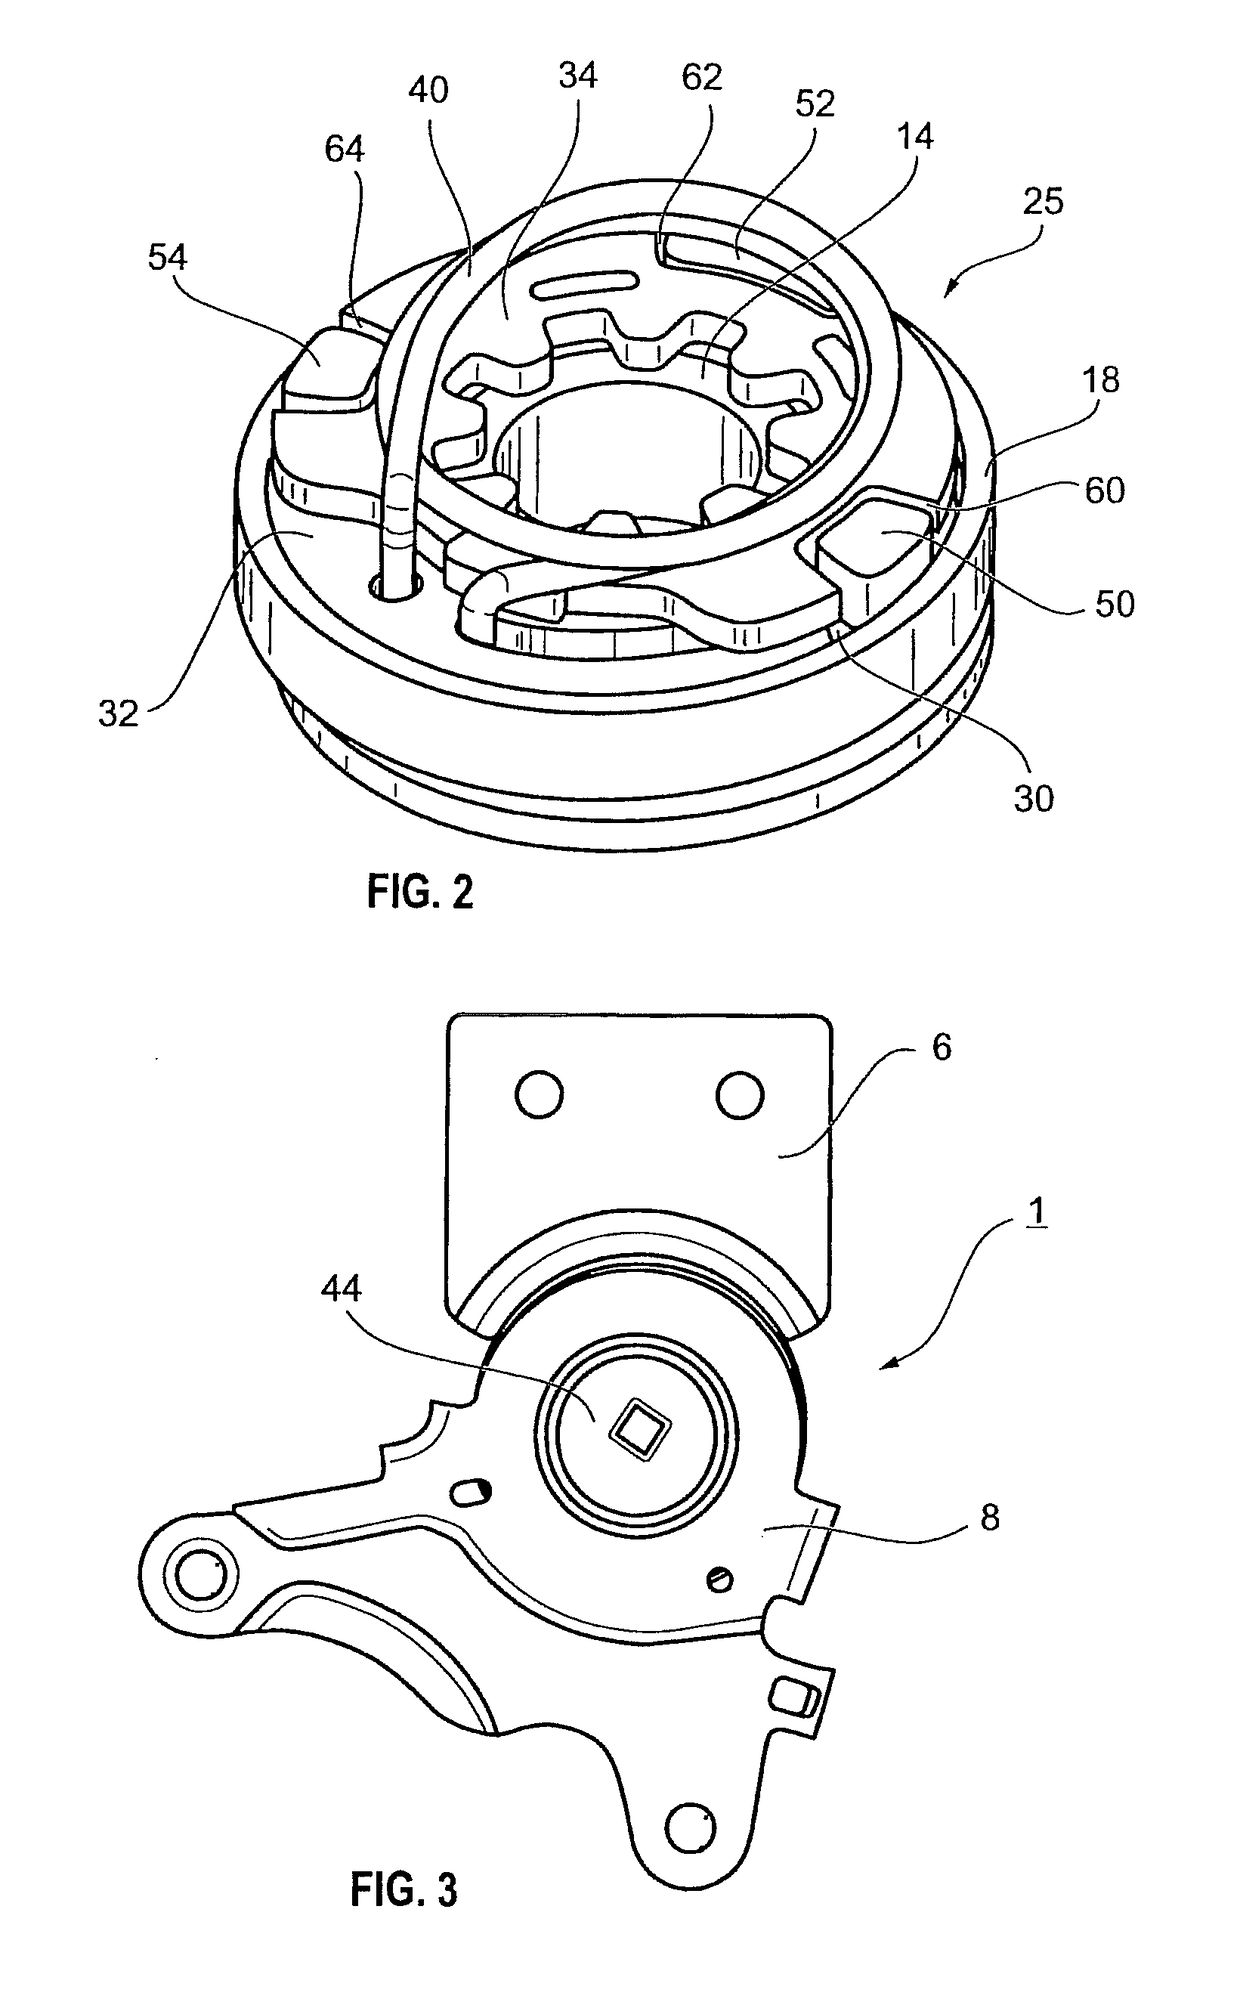 Method for manufacturing an adjustment fitting